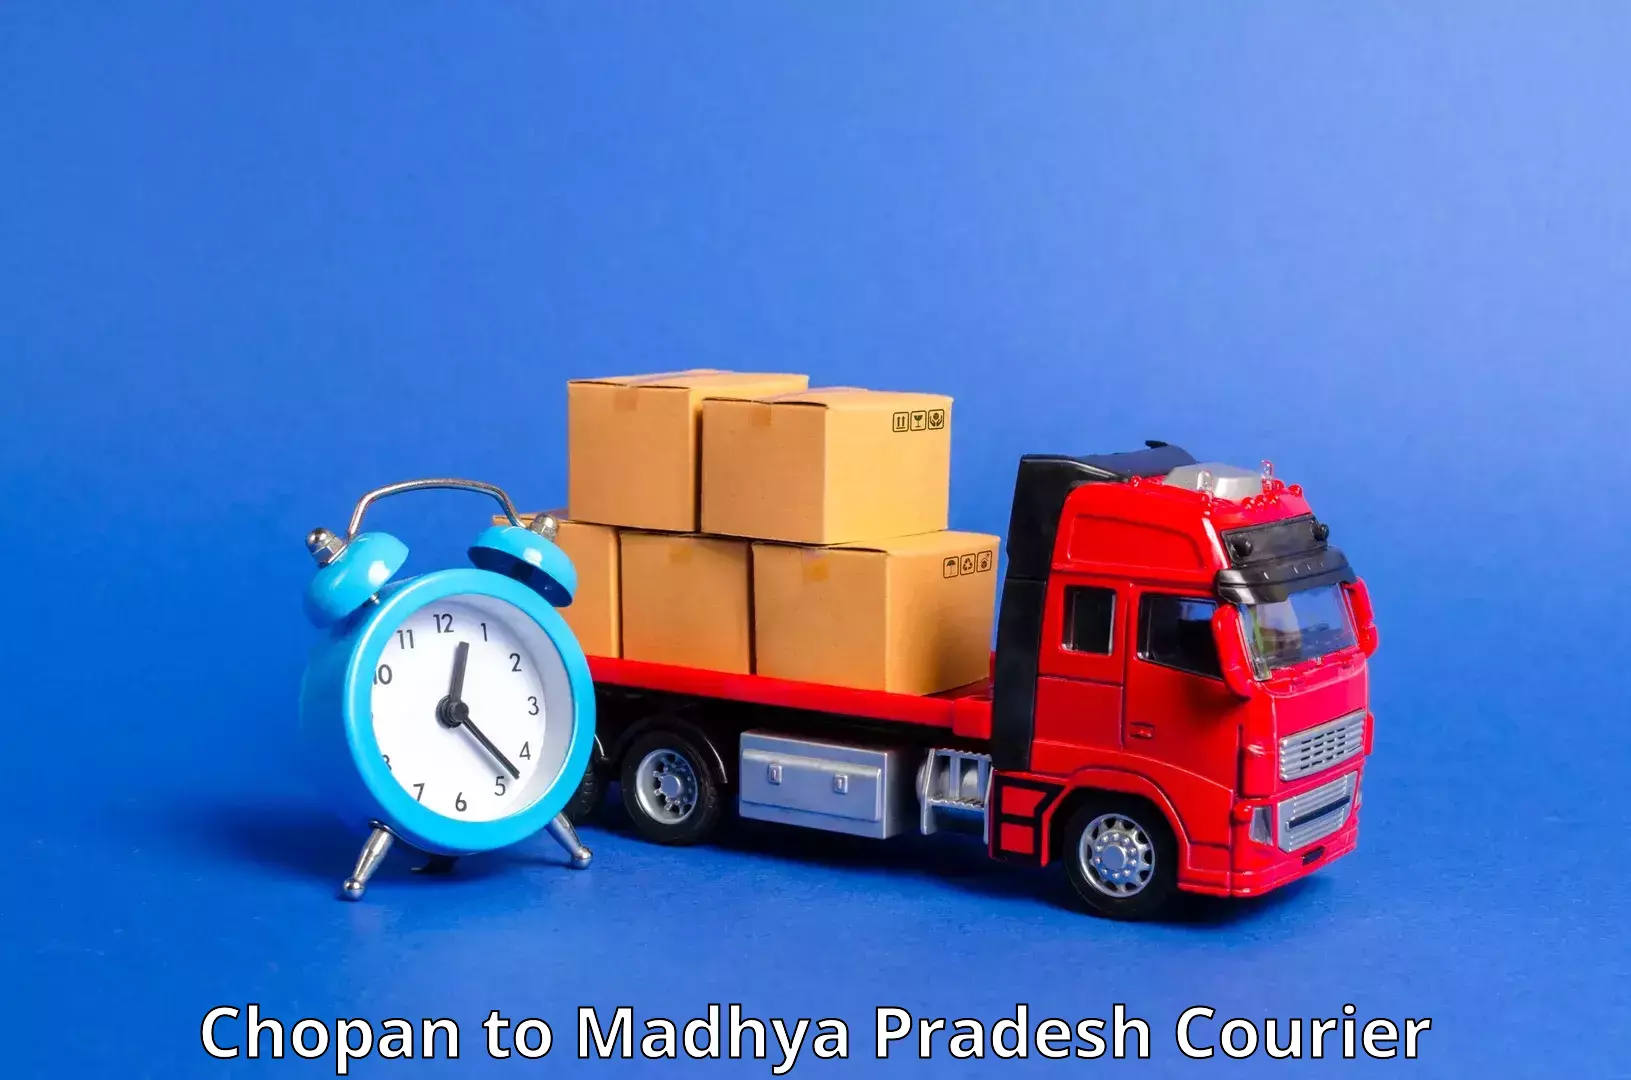 Express package services Chopan to Ratlam